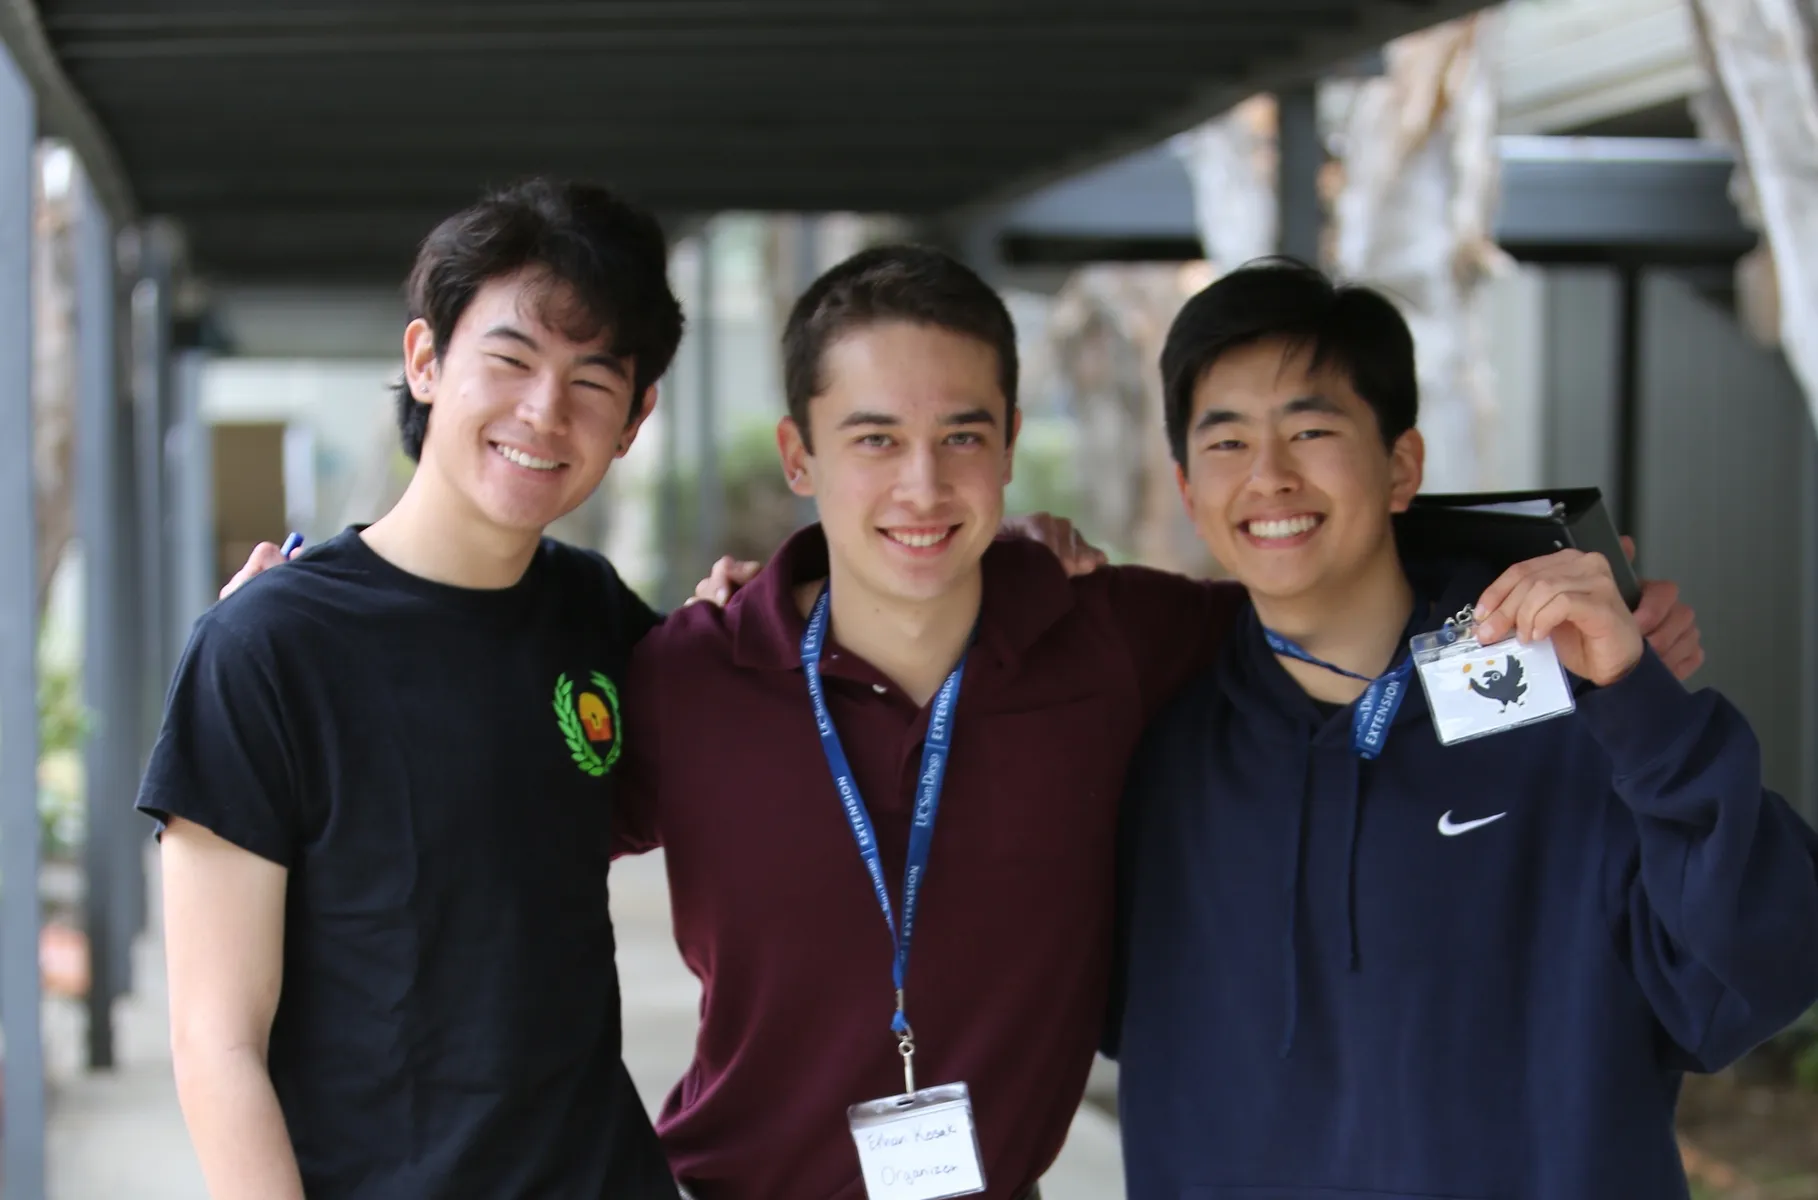 Co-founders Ethan Wang, Ethan Kosaki, and Brandon Joe are ready to start the day